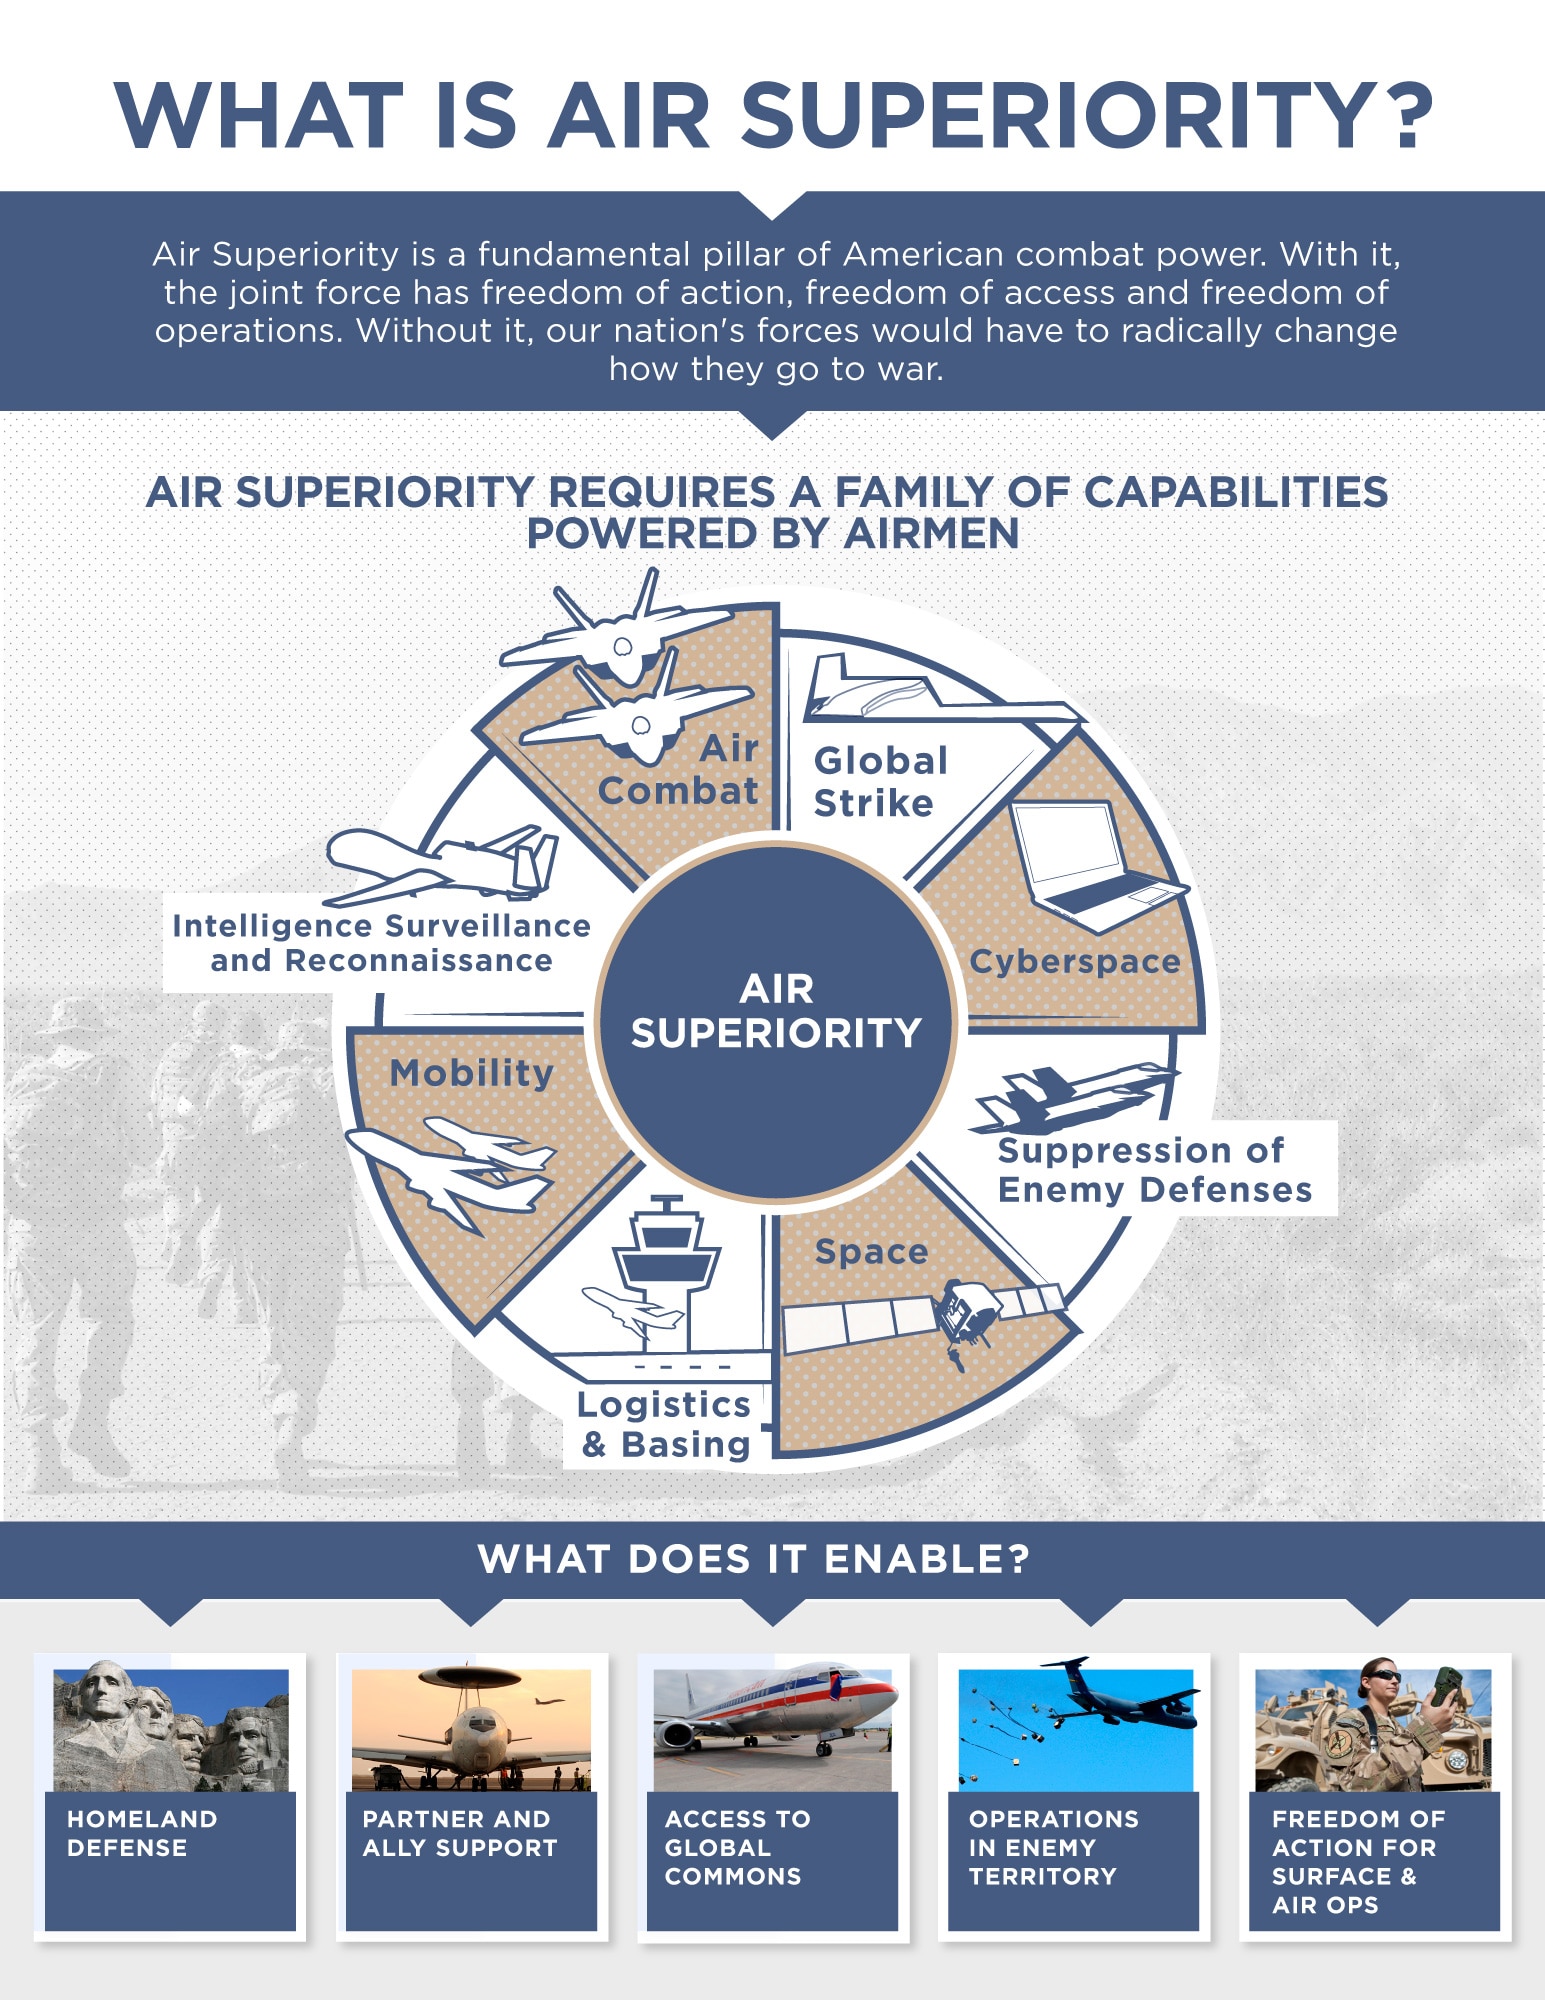 The Air Force introduced the results of a yearlong study focused on developing capability options to ensure joint force air superiority in 2030 and beyond during an Air Force Association breakfast April 7 in Arlington, Virginia.
